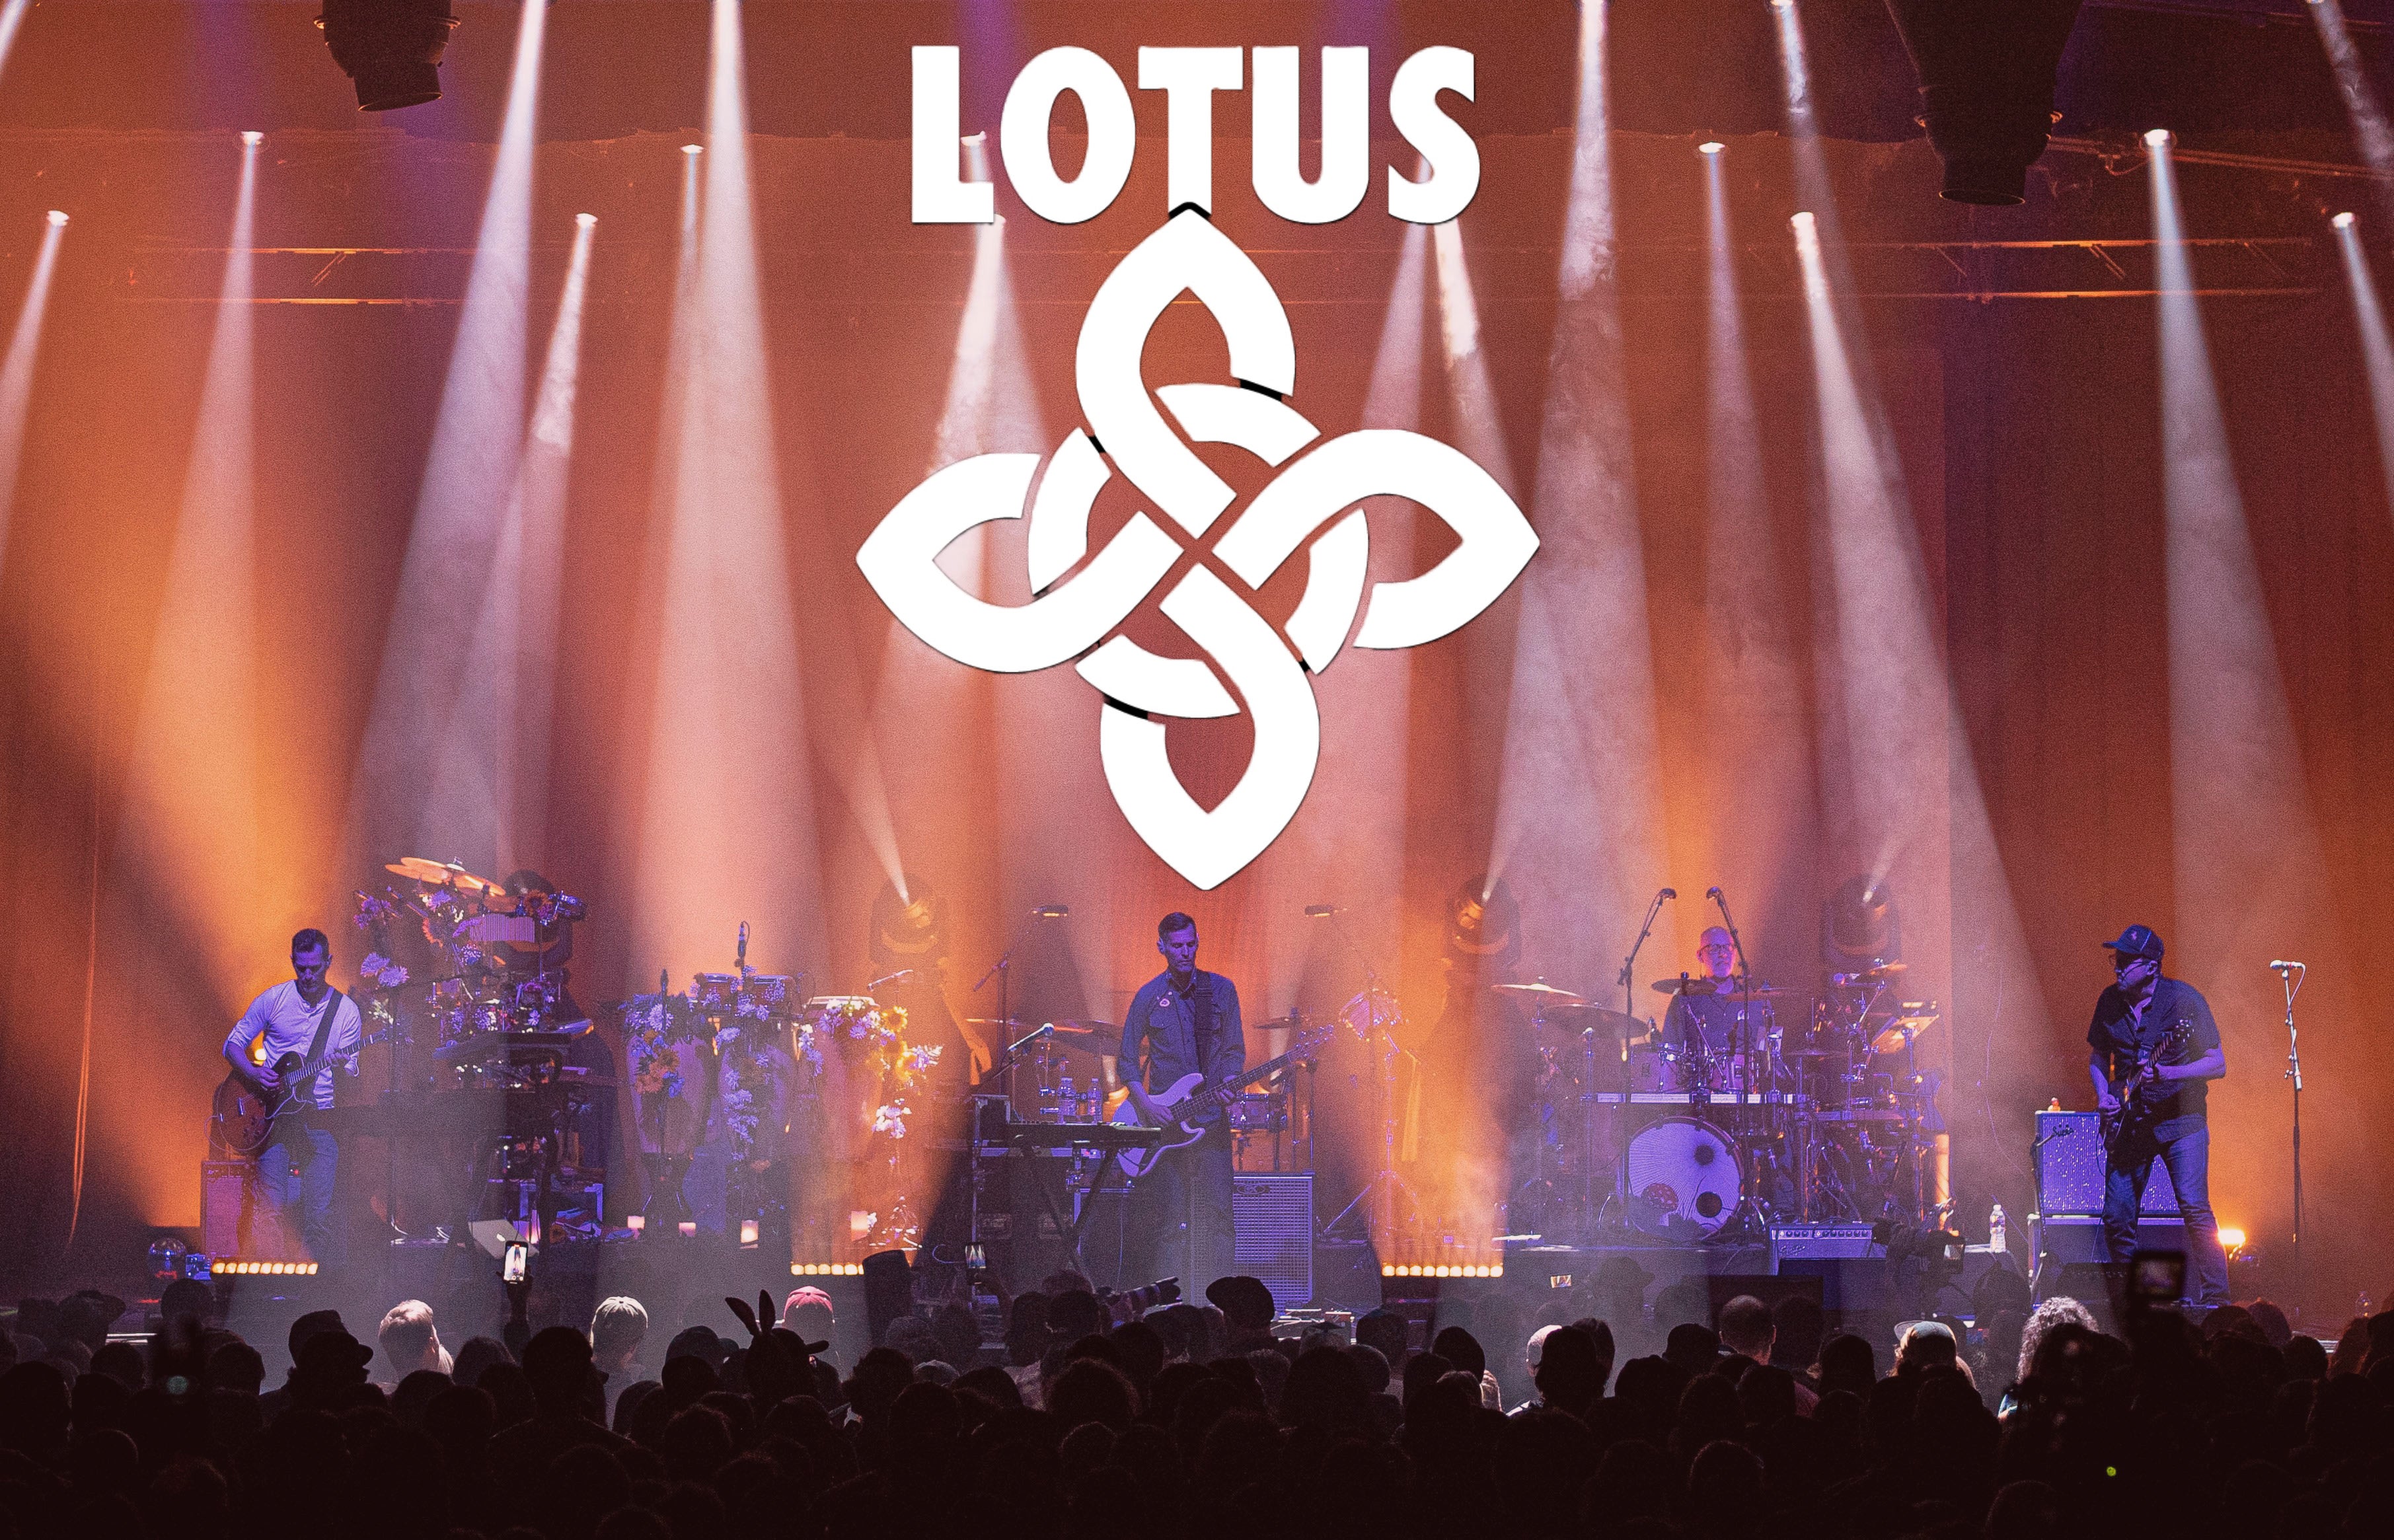 Lotus free presale passcode for early tickets in Washington